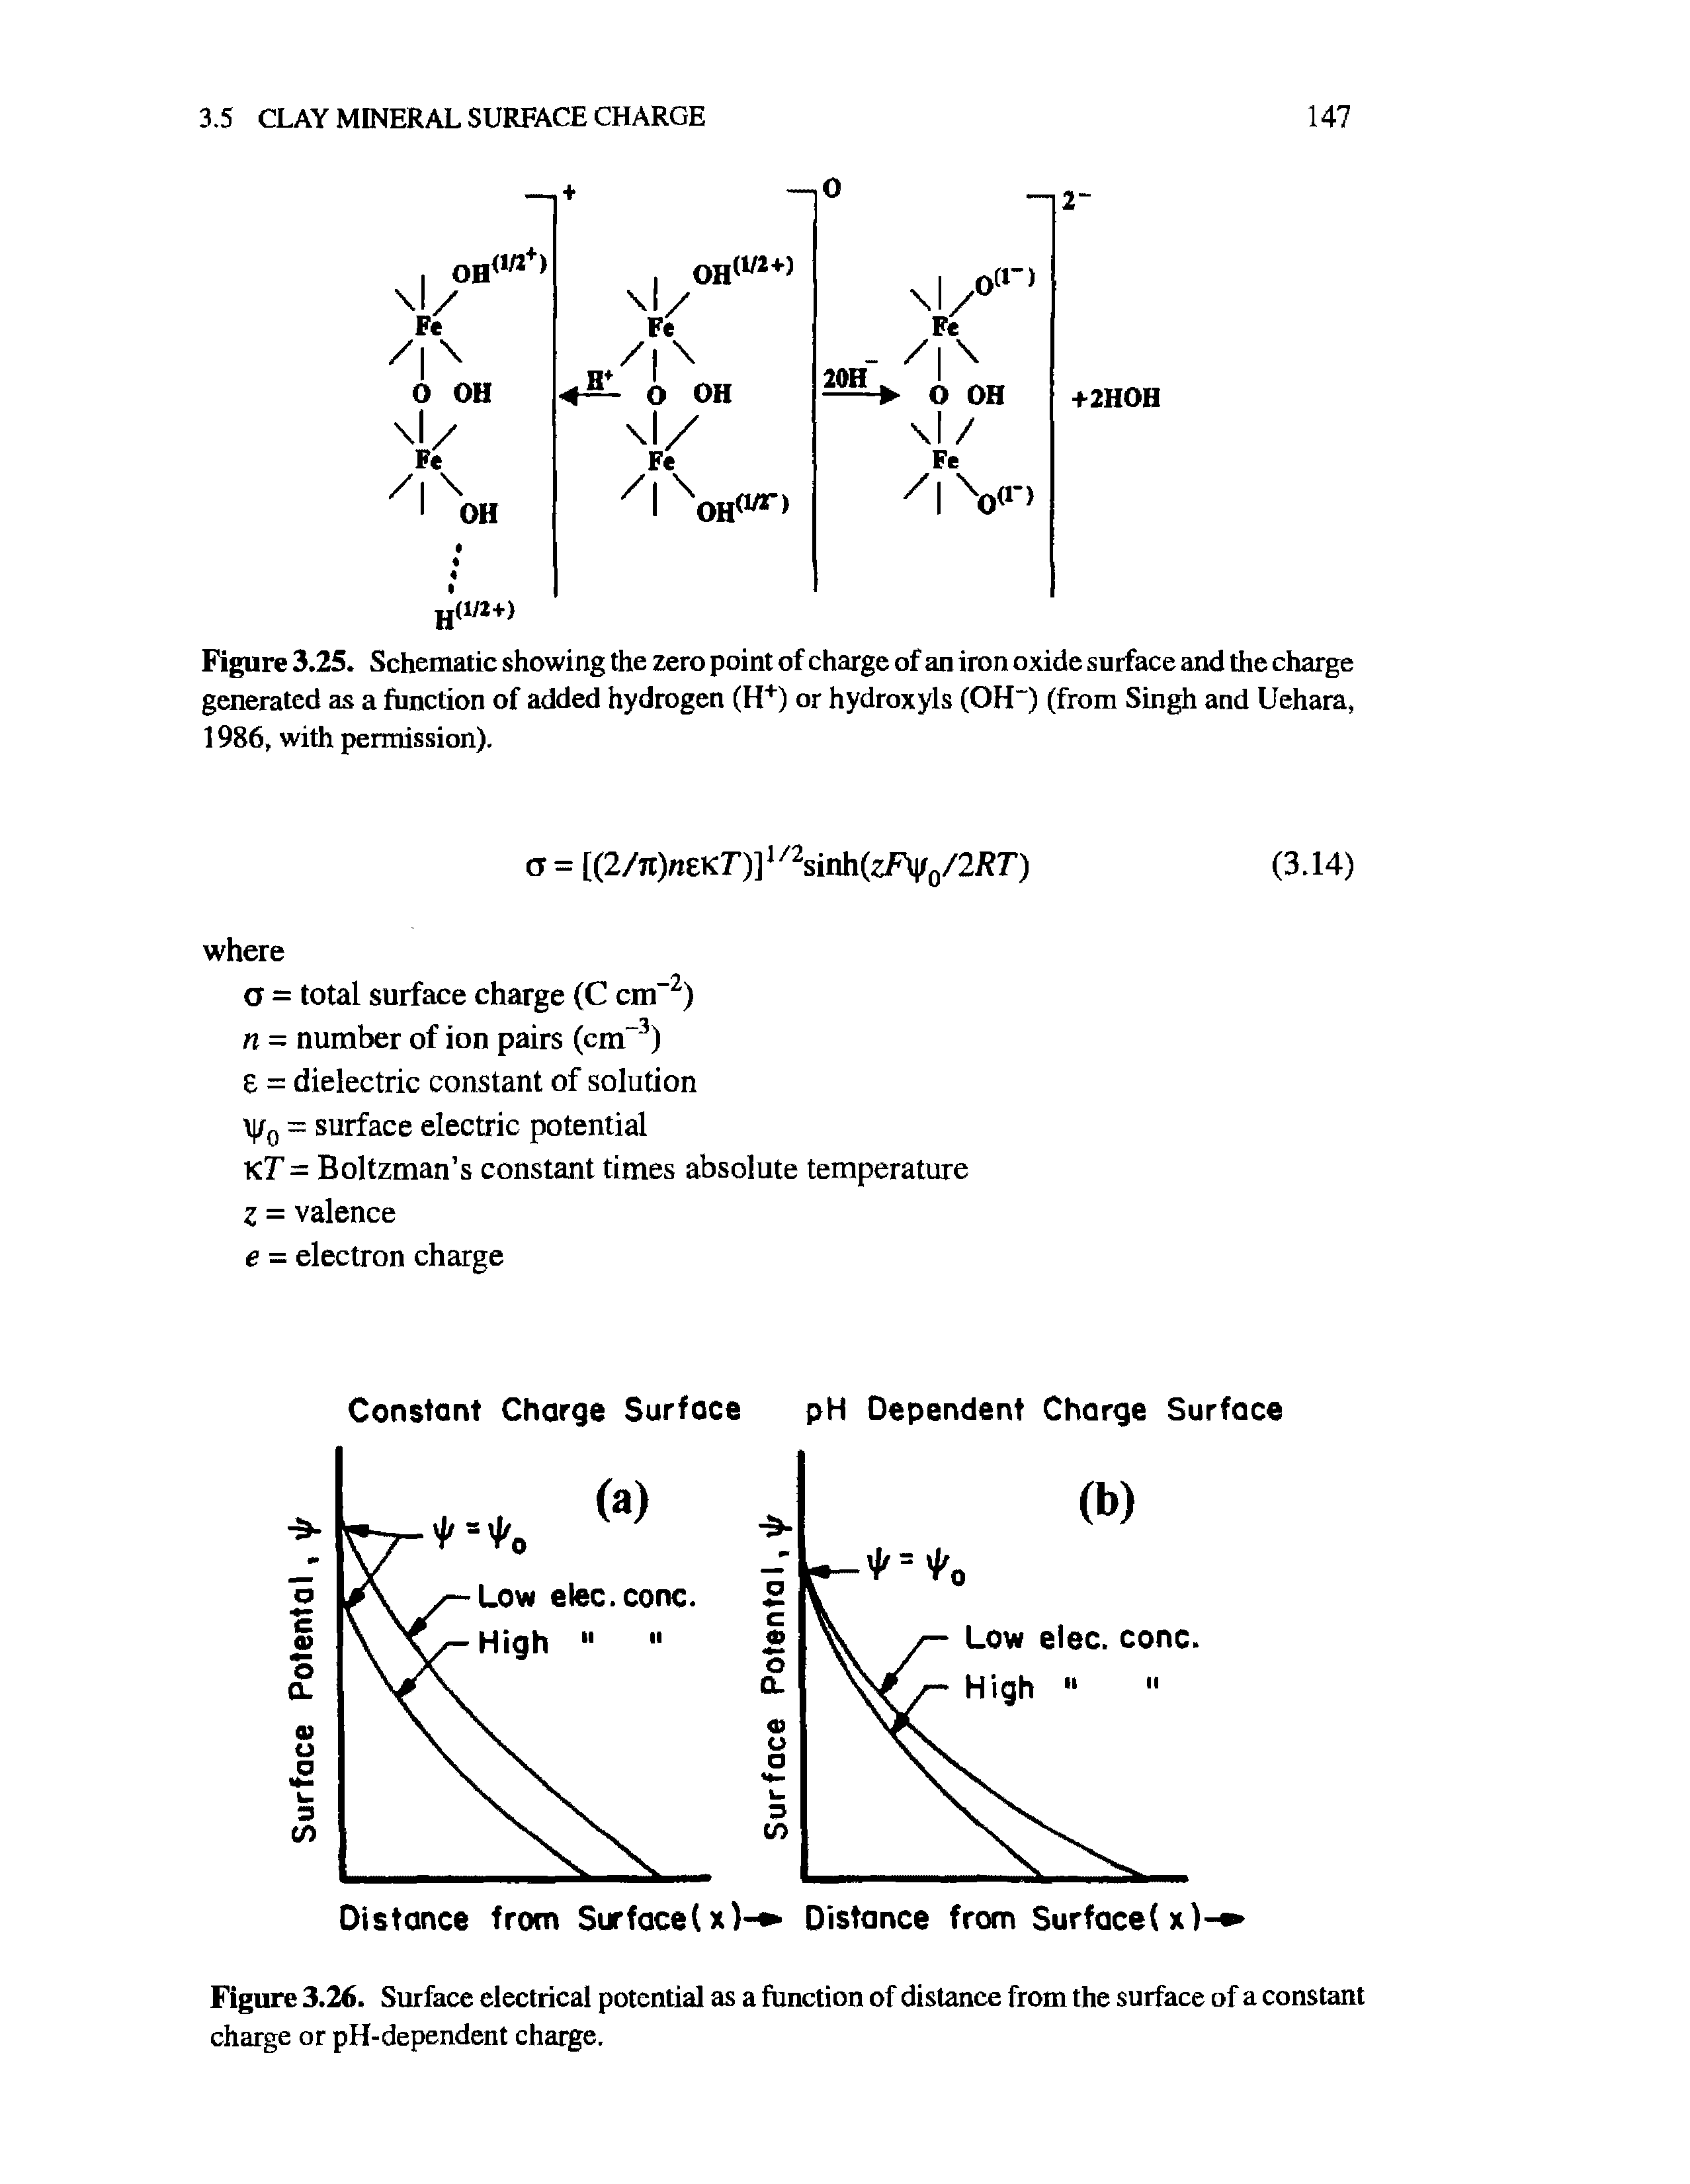 Figure 3.25. Schematic showing the zero point of charge of an iron oxide surface and the charge generated as a function of added hydrogen (H+) or hydroxyls (OH ) (from Singh and Uehara, 1986, with permission).